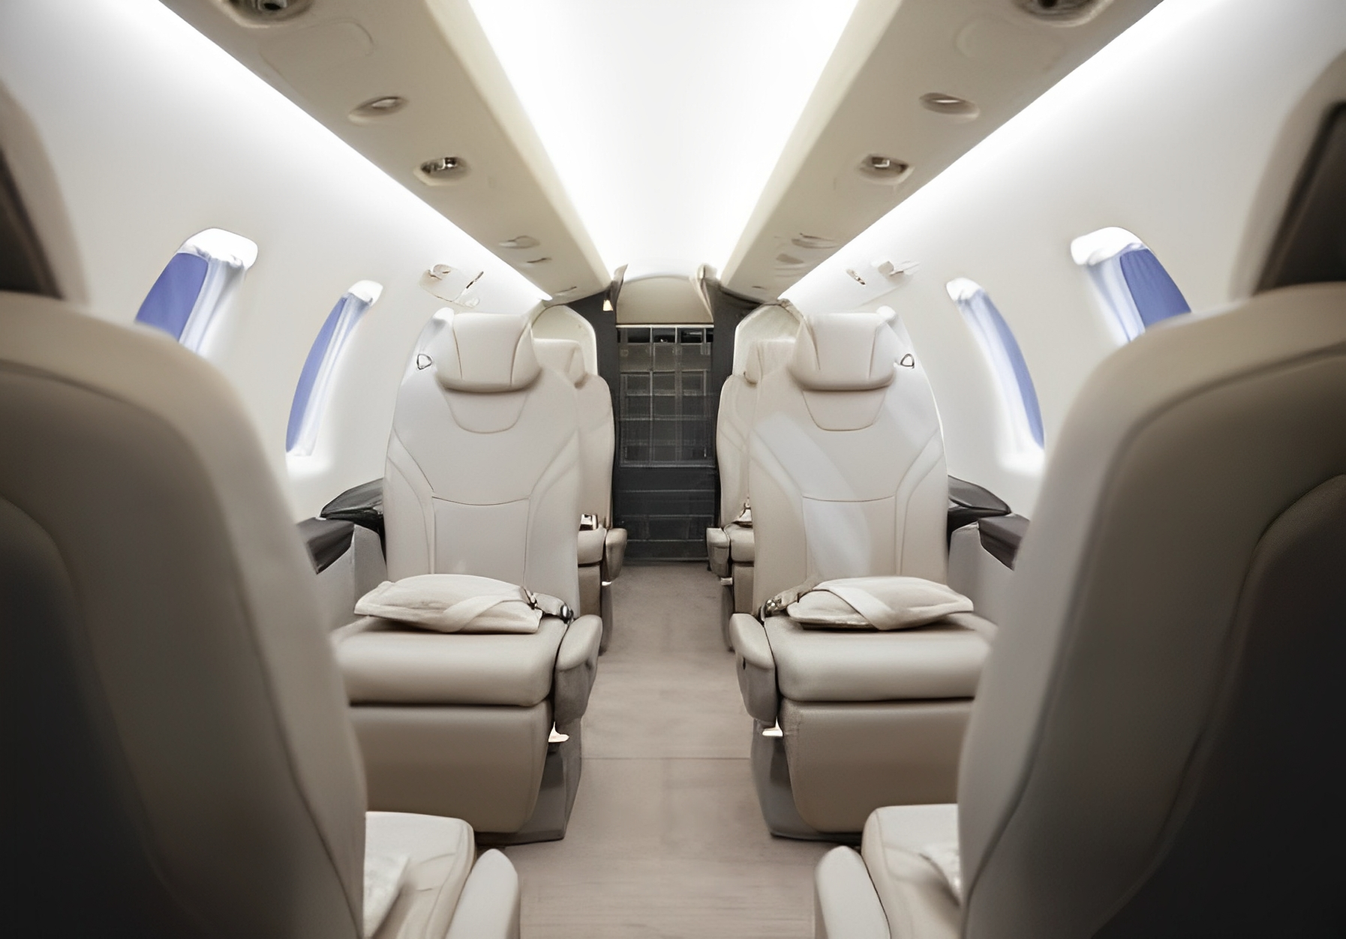 A luxurious interior for a superior travel experience